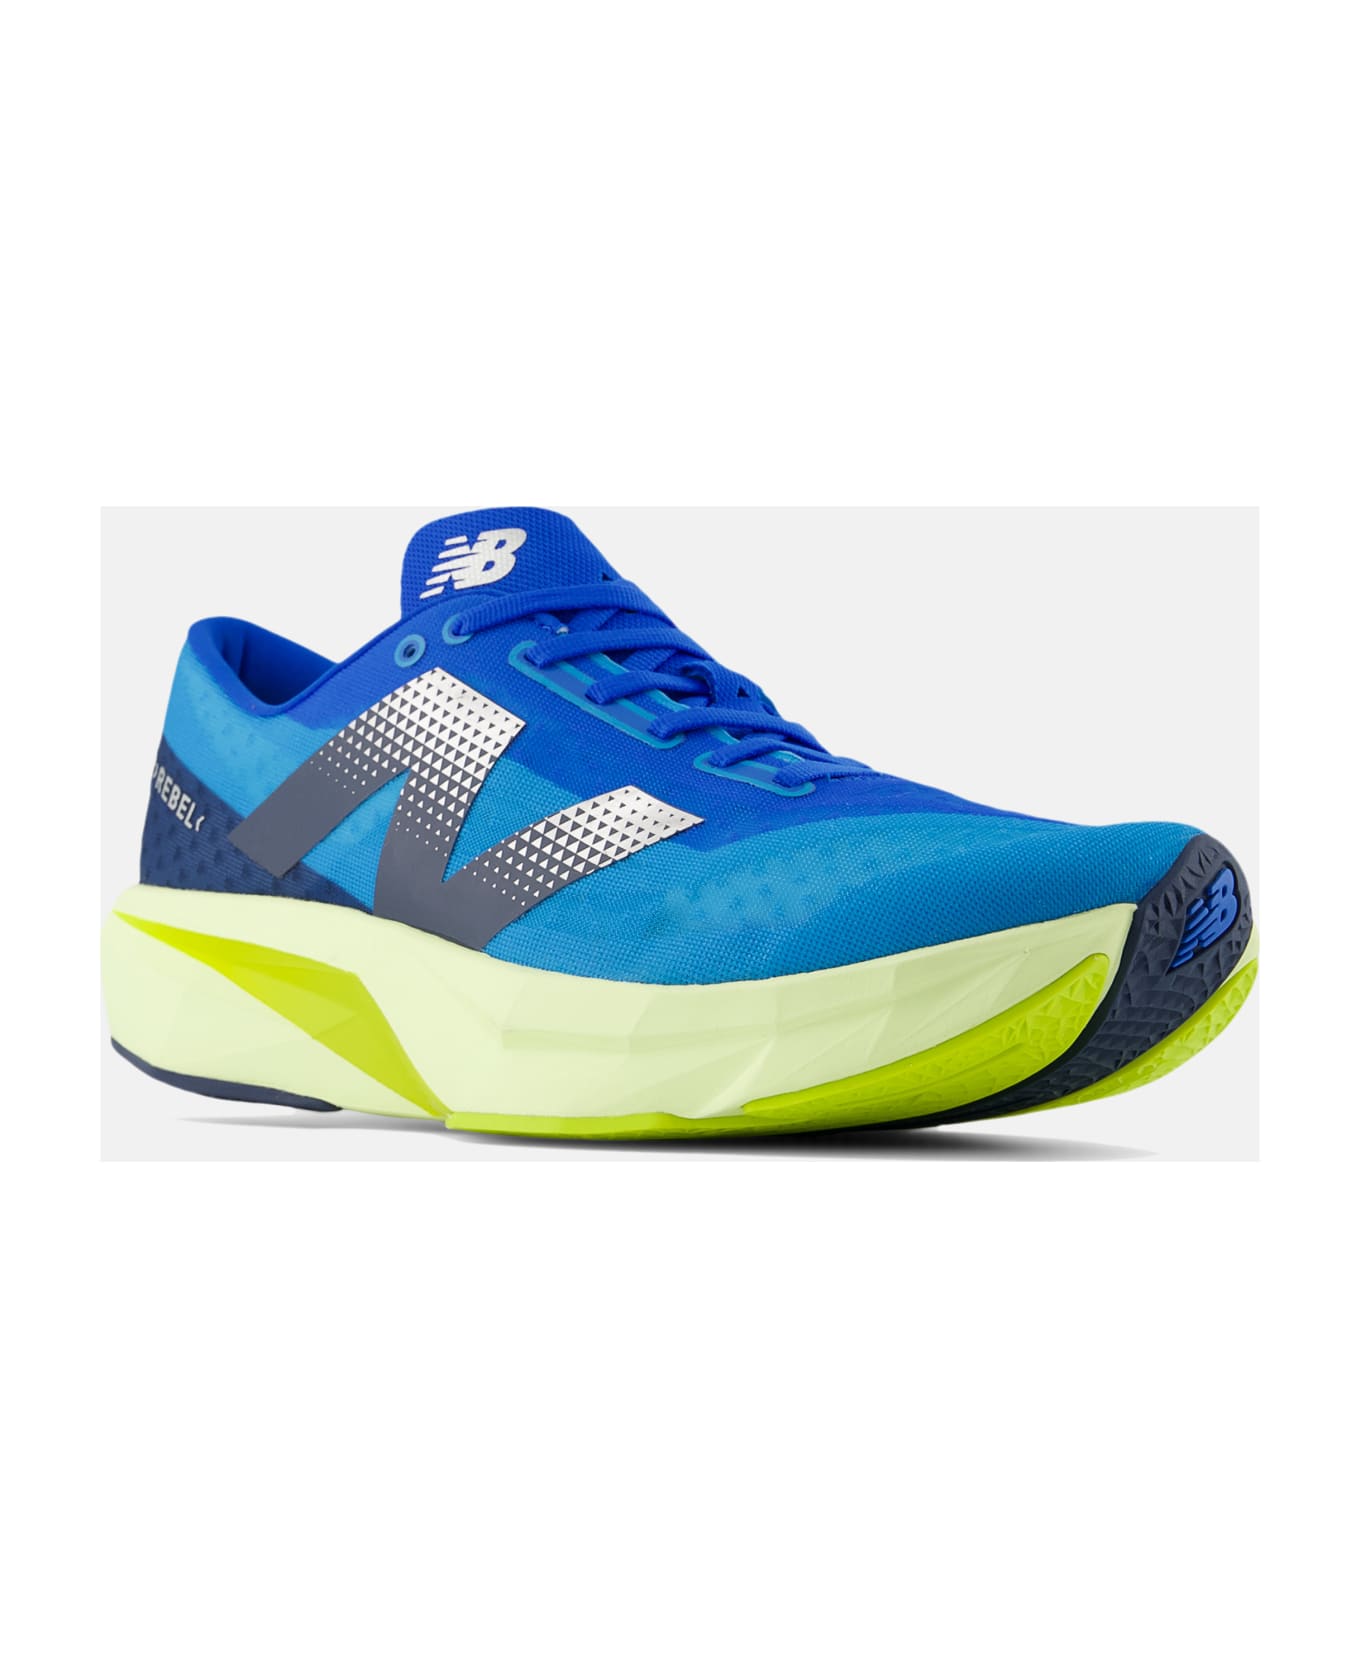 New Balance Rebel V4 Sneakers - Clear Blue